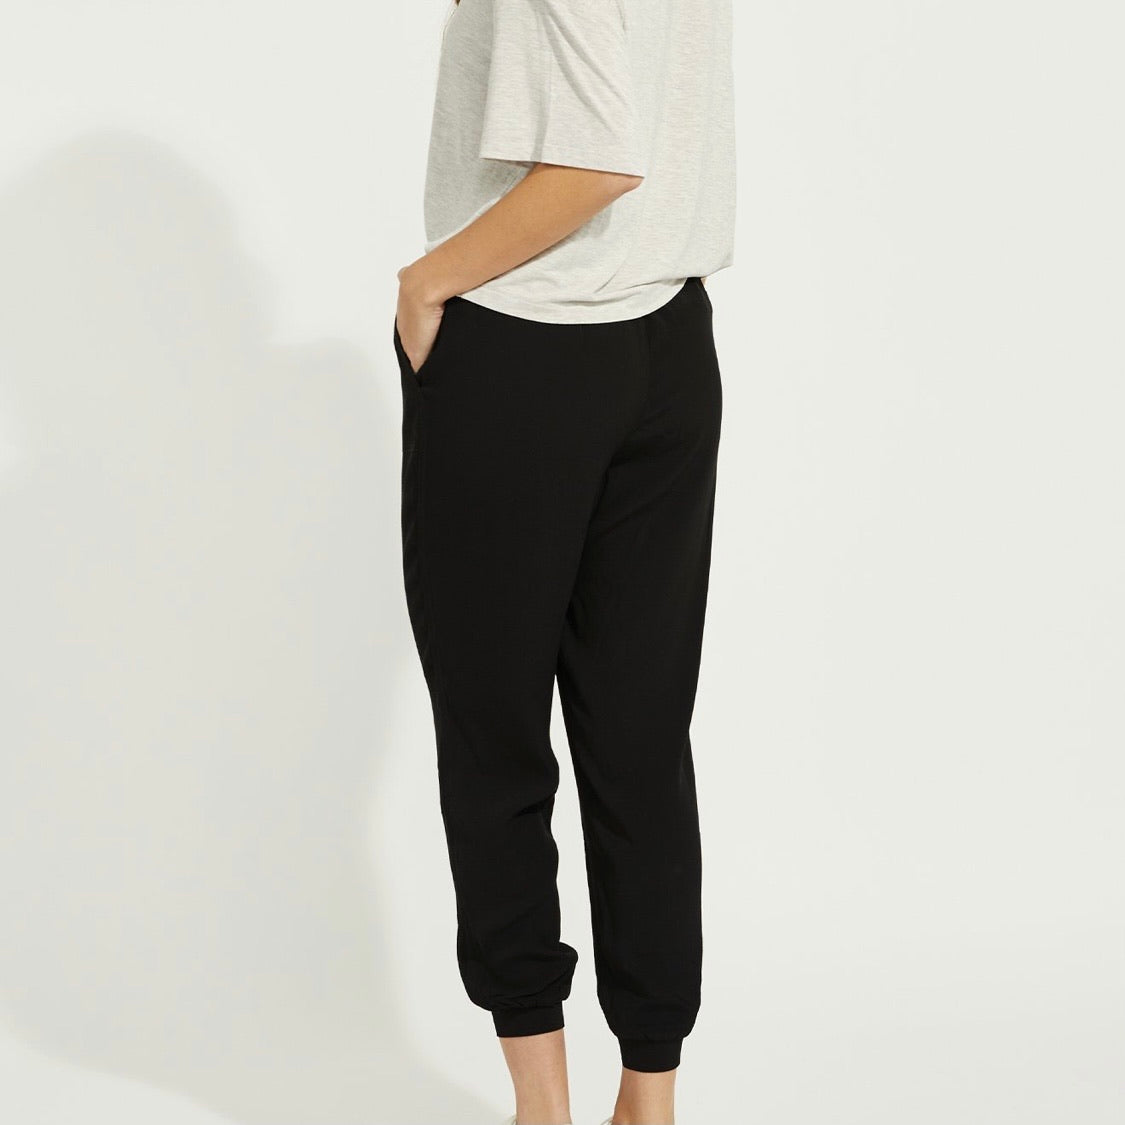 GENTLE FAWN Storm Pant